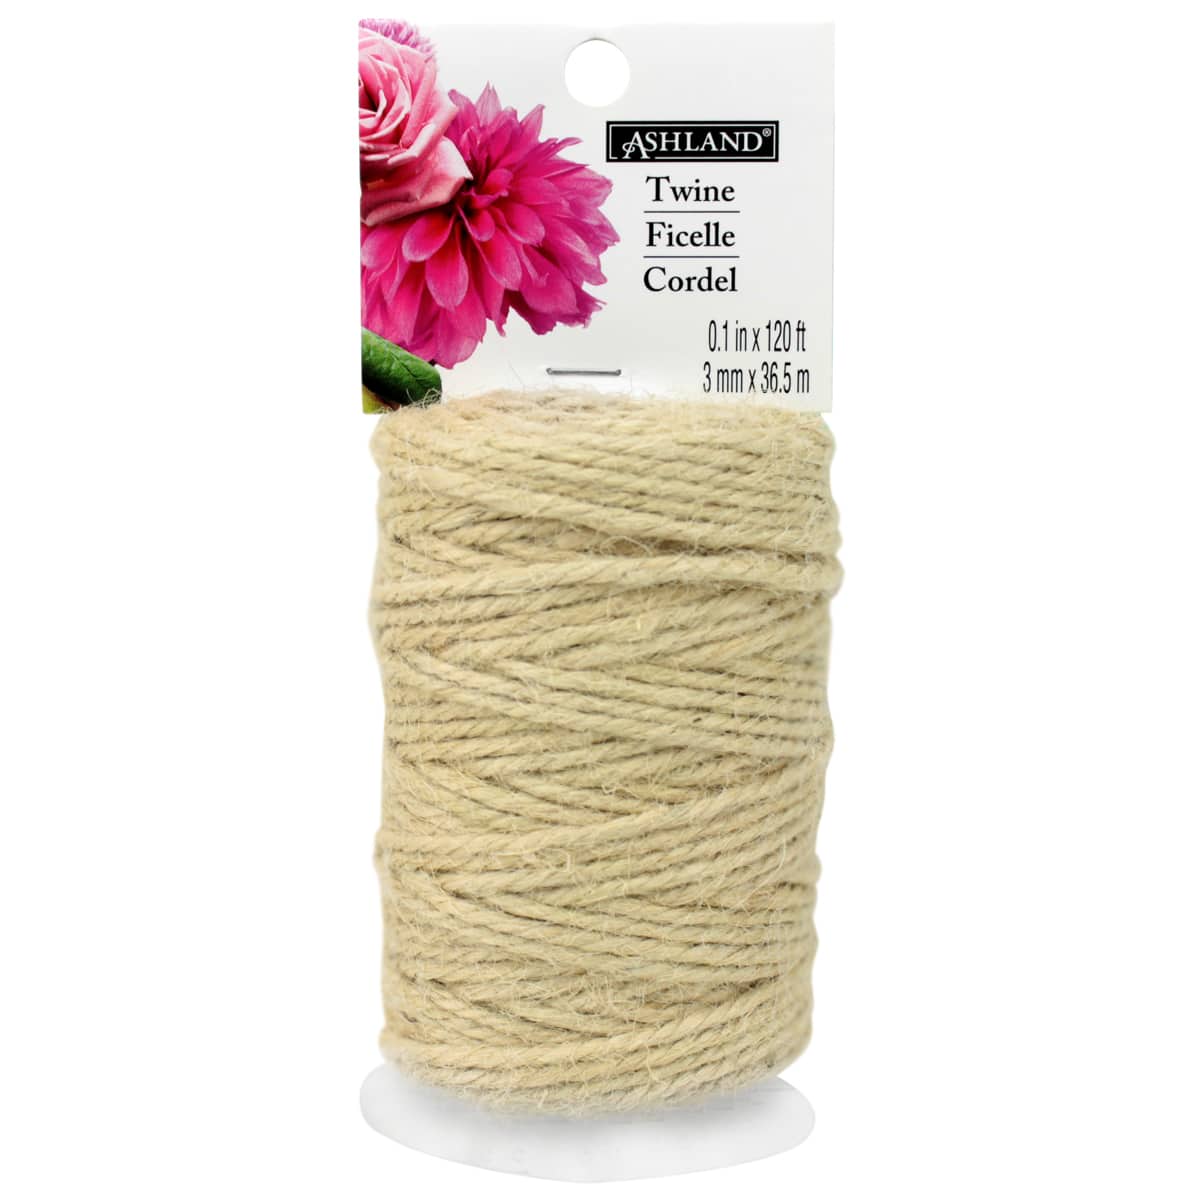 WREATH & GARDEN STRING 1 x 75m OASIS NATURAL JUTE MOSSING TWINE FOR FLORISTRY 